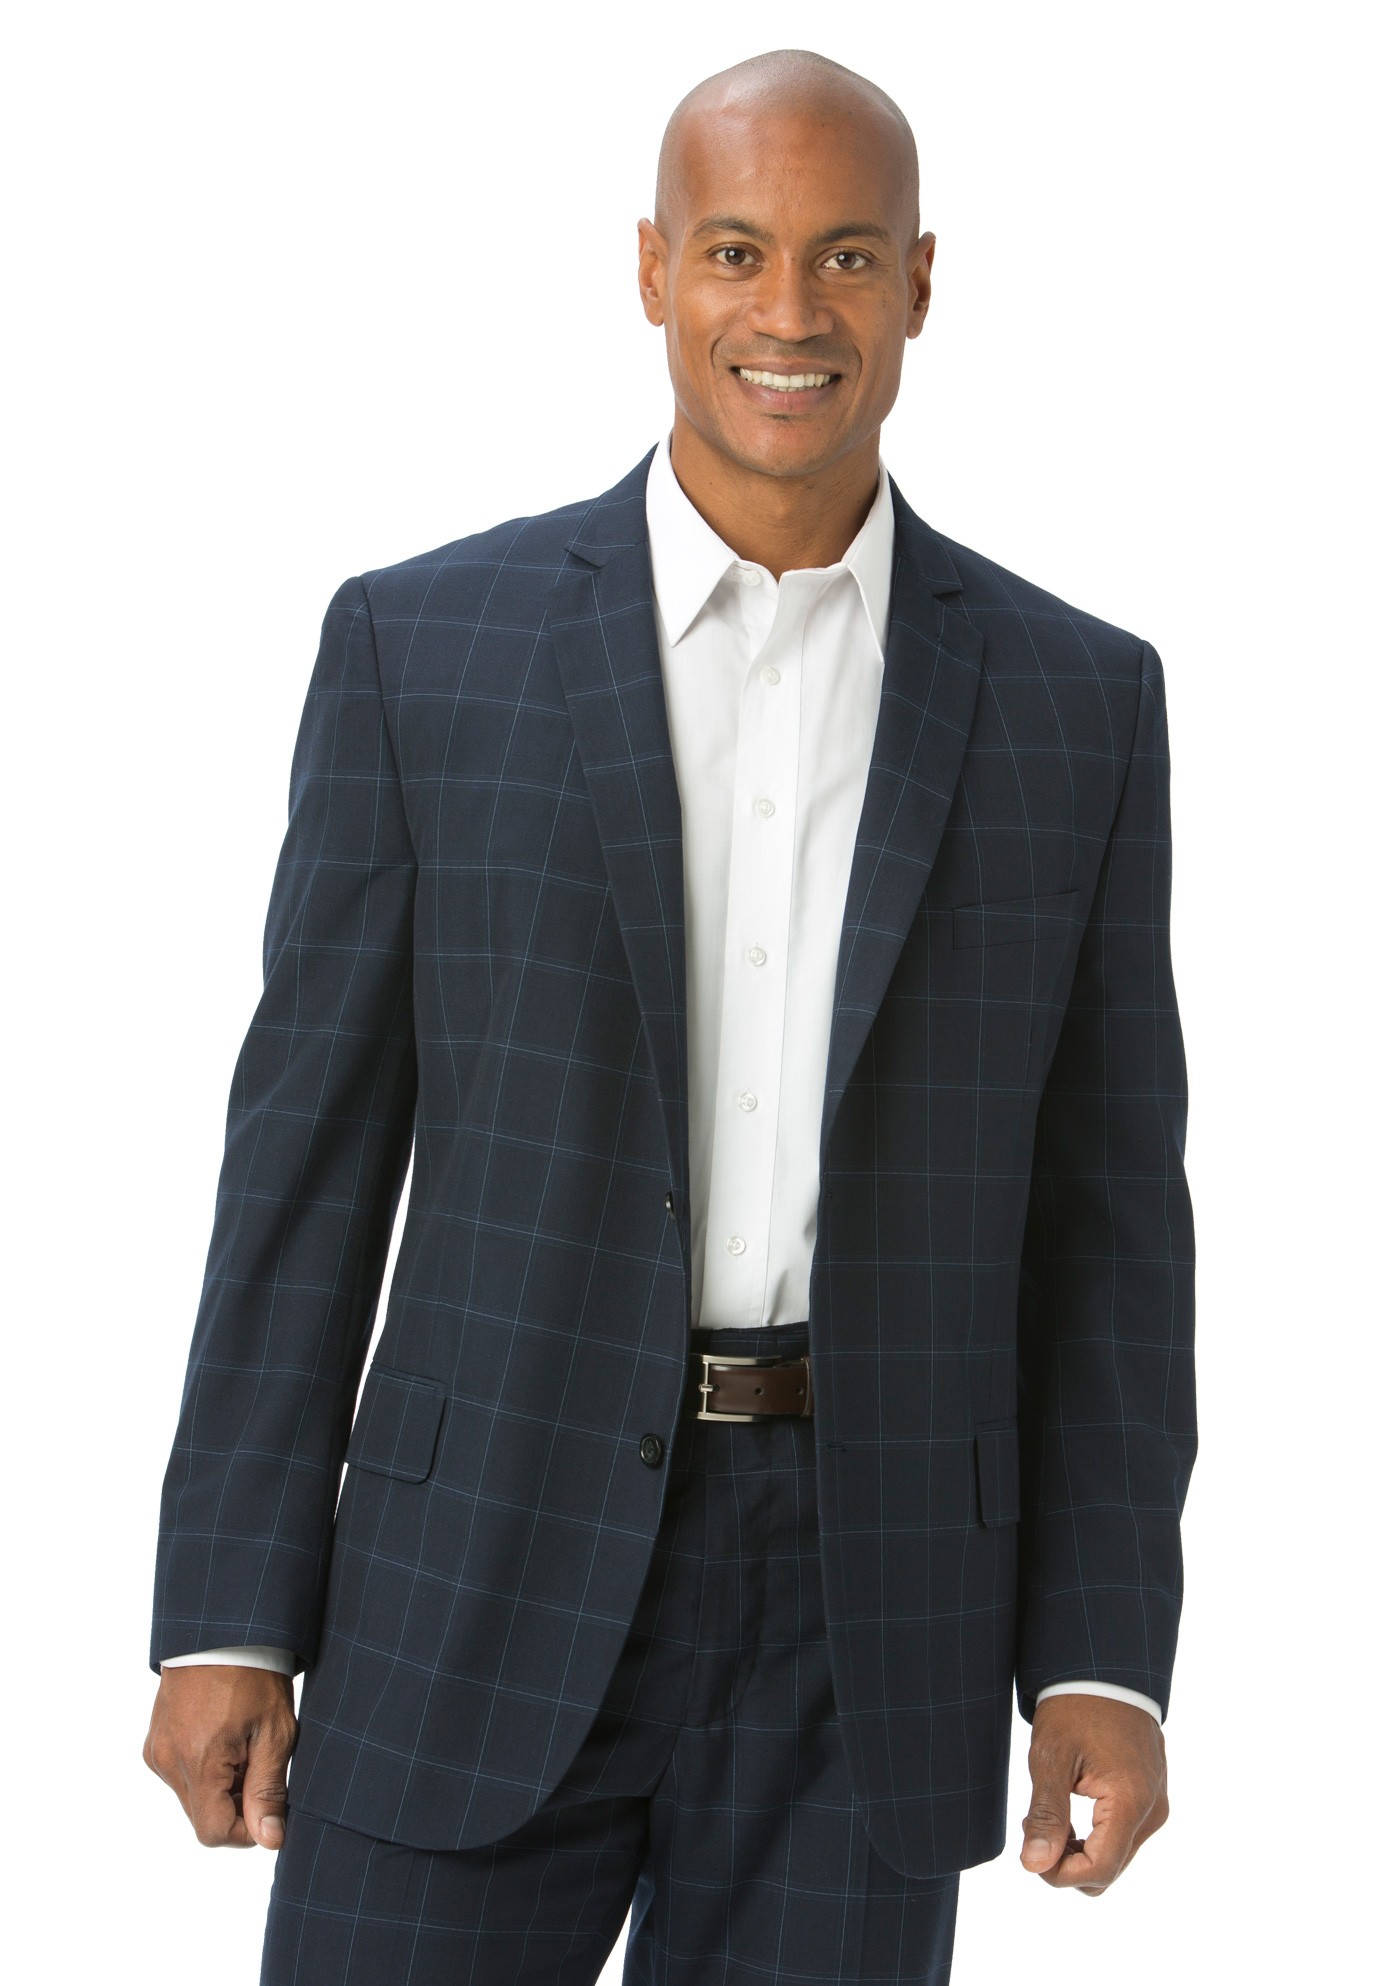 Lightweight Two-Button Suit Jacket by KS Signature® | King Size